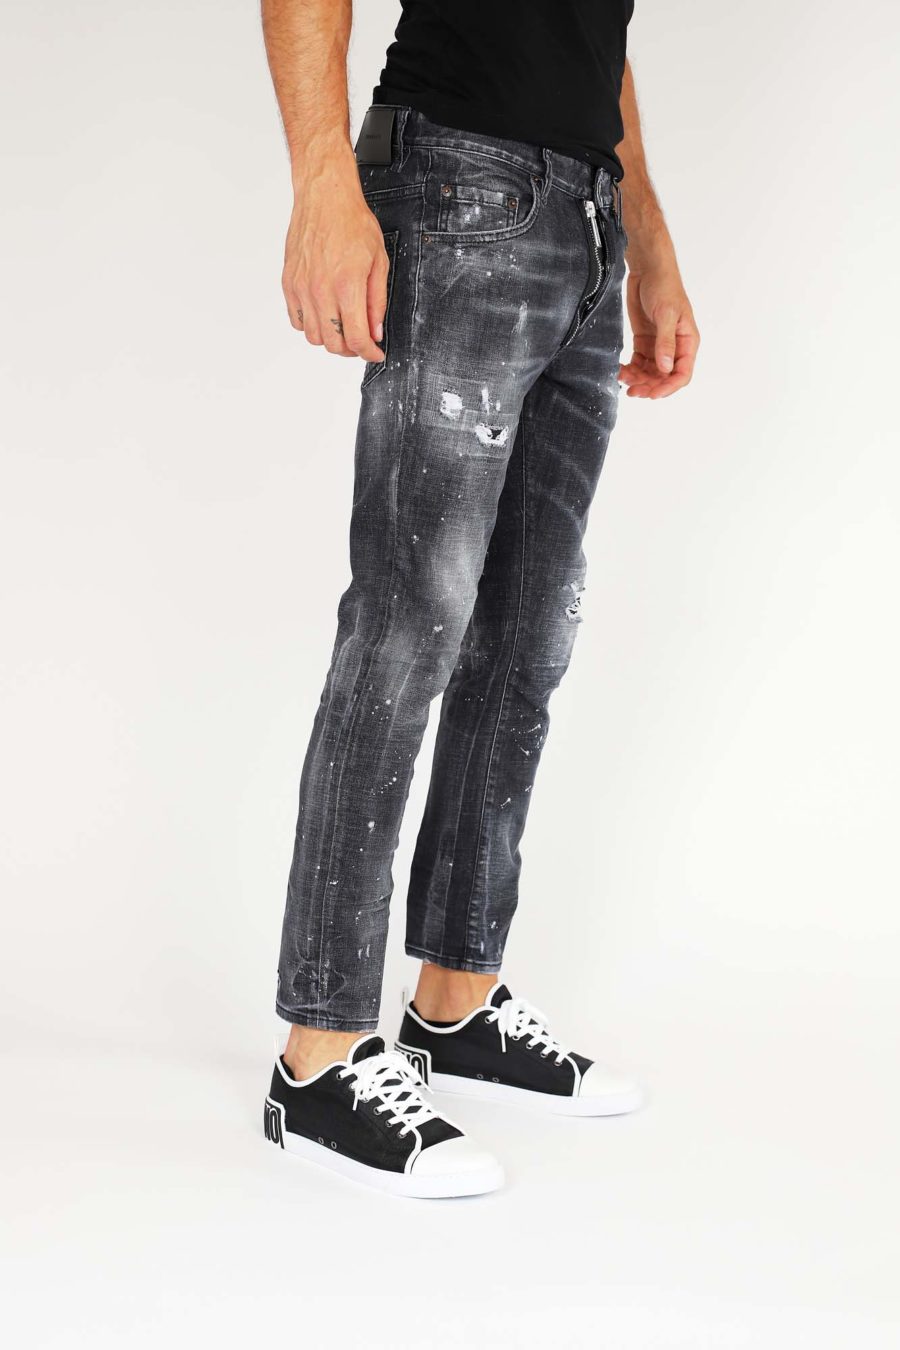 Black "Skater" jeans with zip - IMG 9828